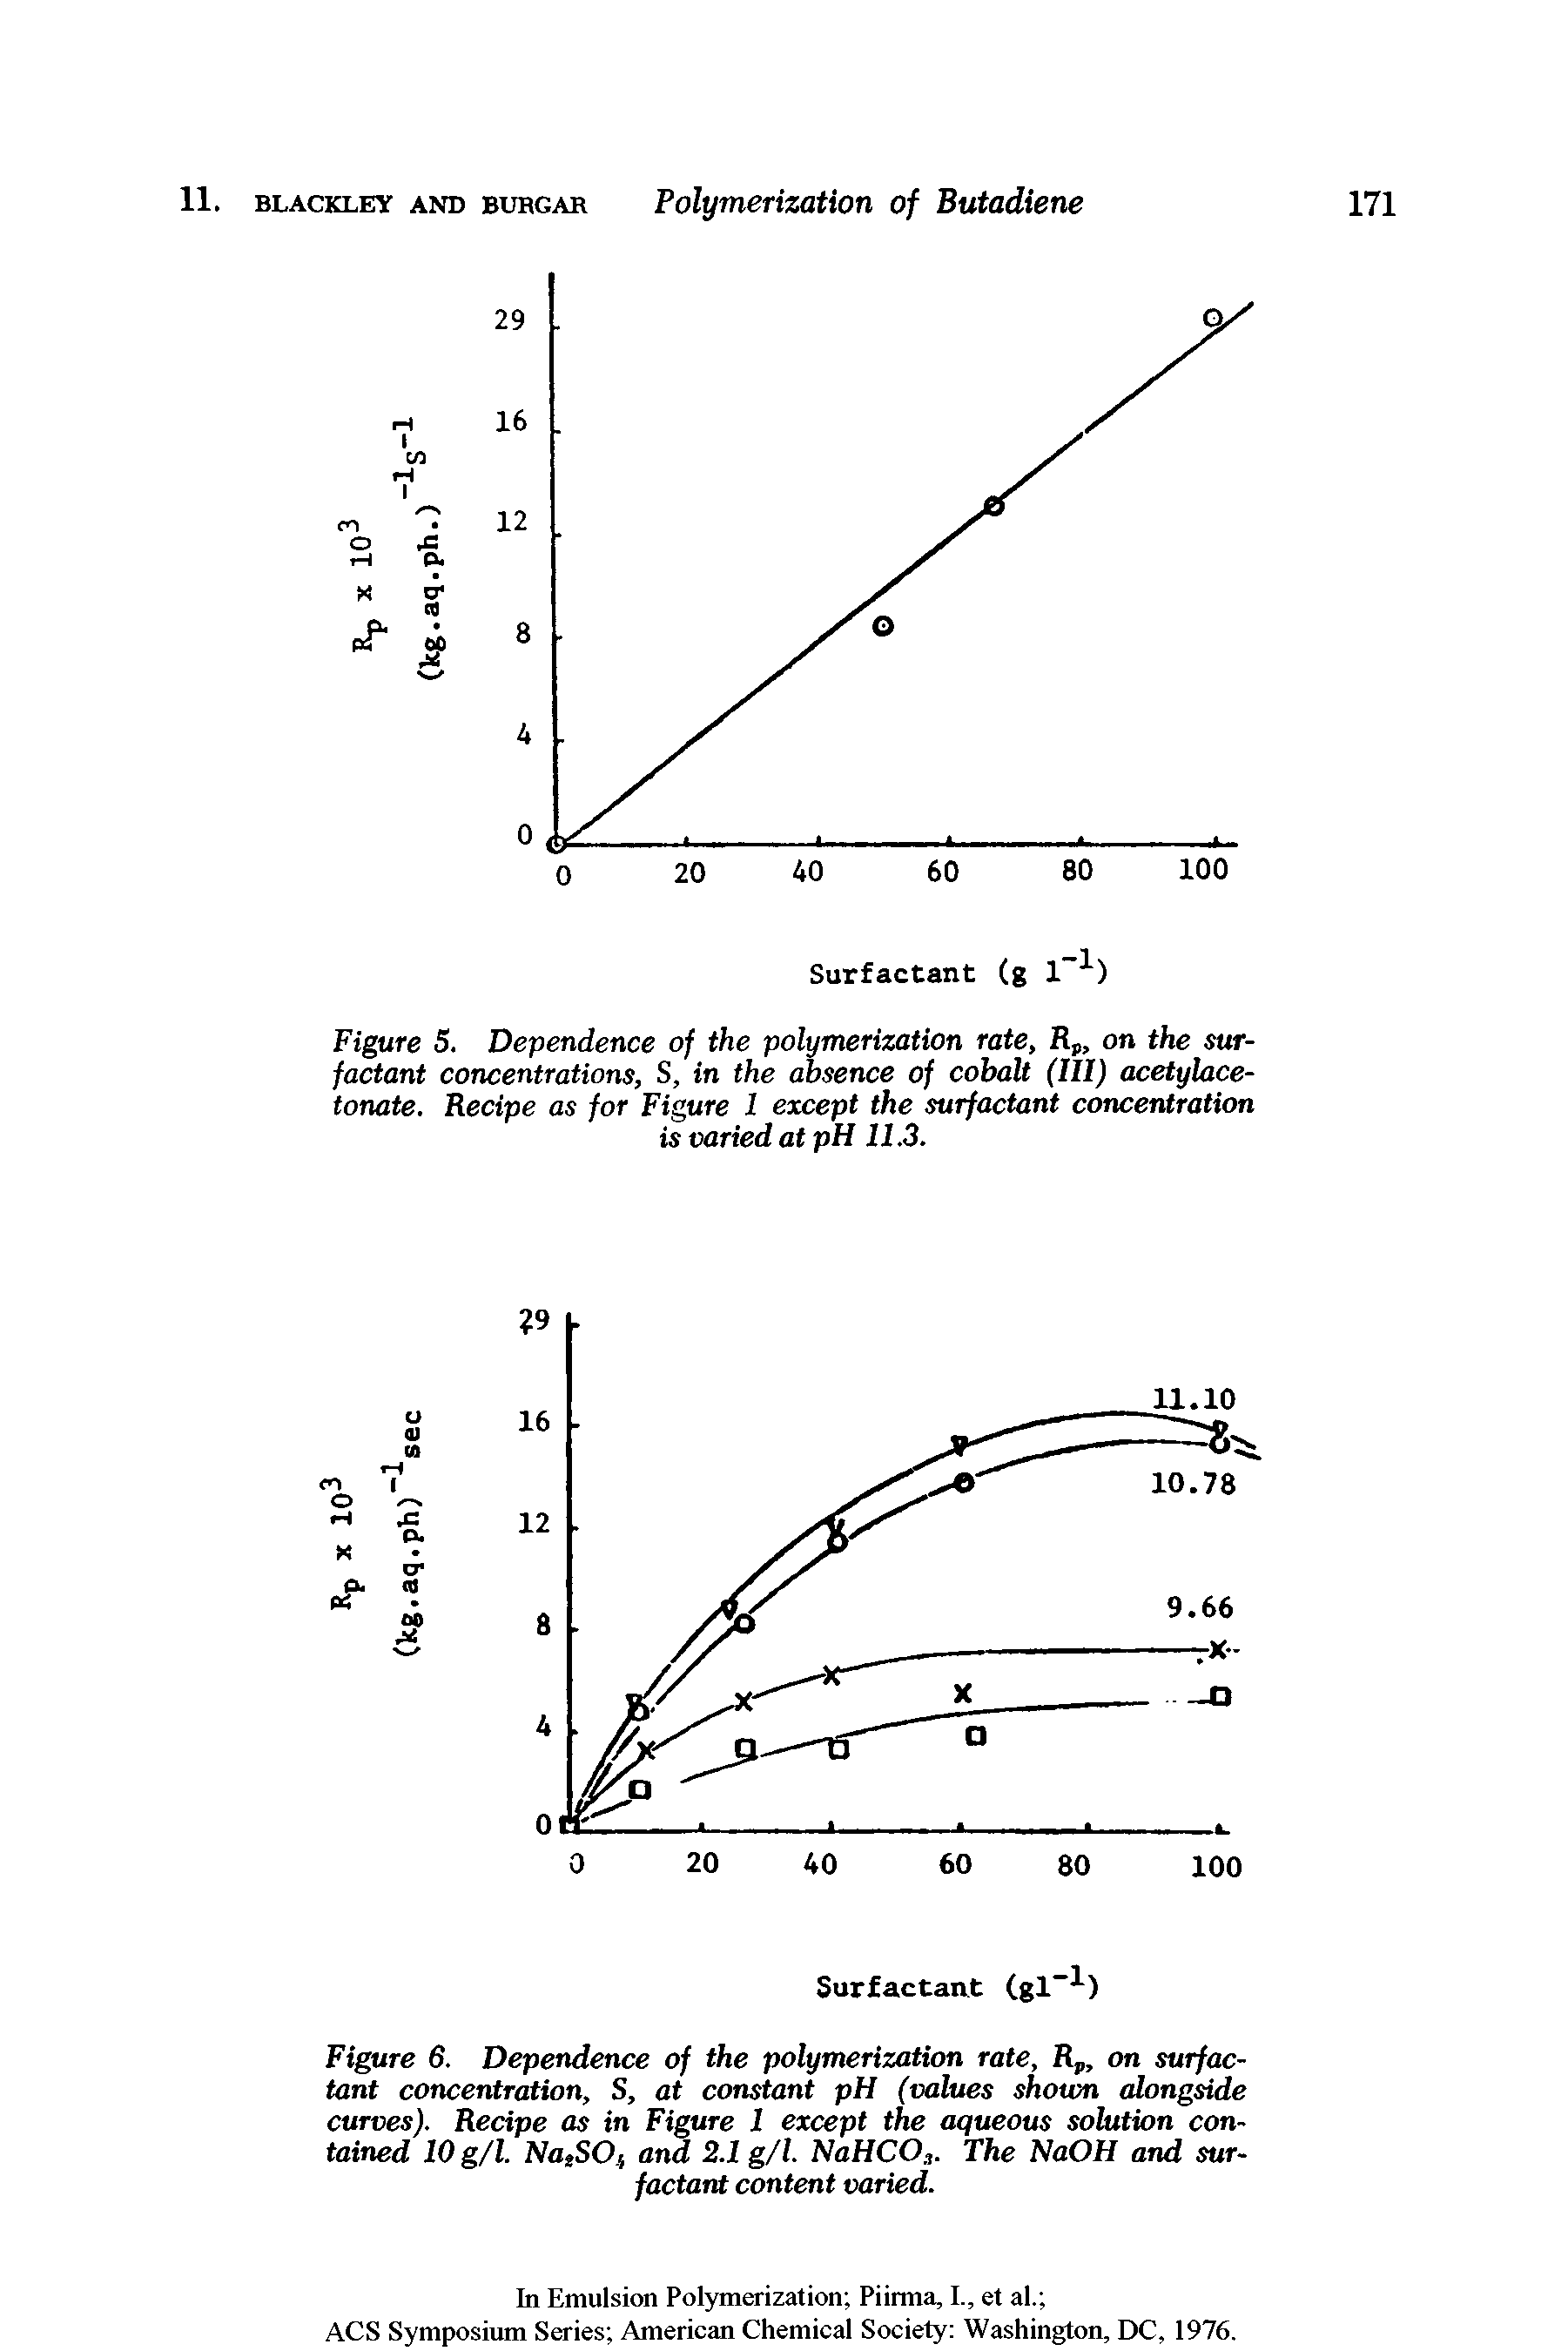 Figure 6. Dependence of the polymerization rate, Rp, on surfactant concentration, S, at constant pH (values shown alongside curves). Recipe as in Figure 1 except the aqueous solution contained 10 g/l. NagSOf and 2.1 g/l. HaHCO,. The NaOH and surfactant content varied.